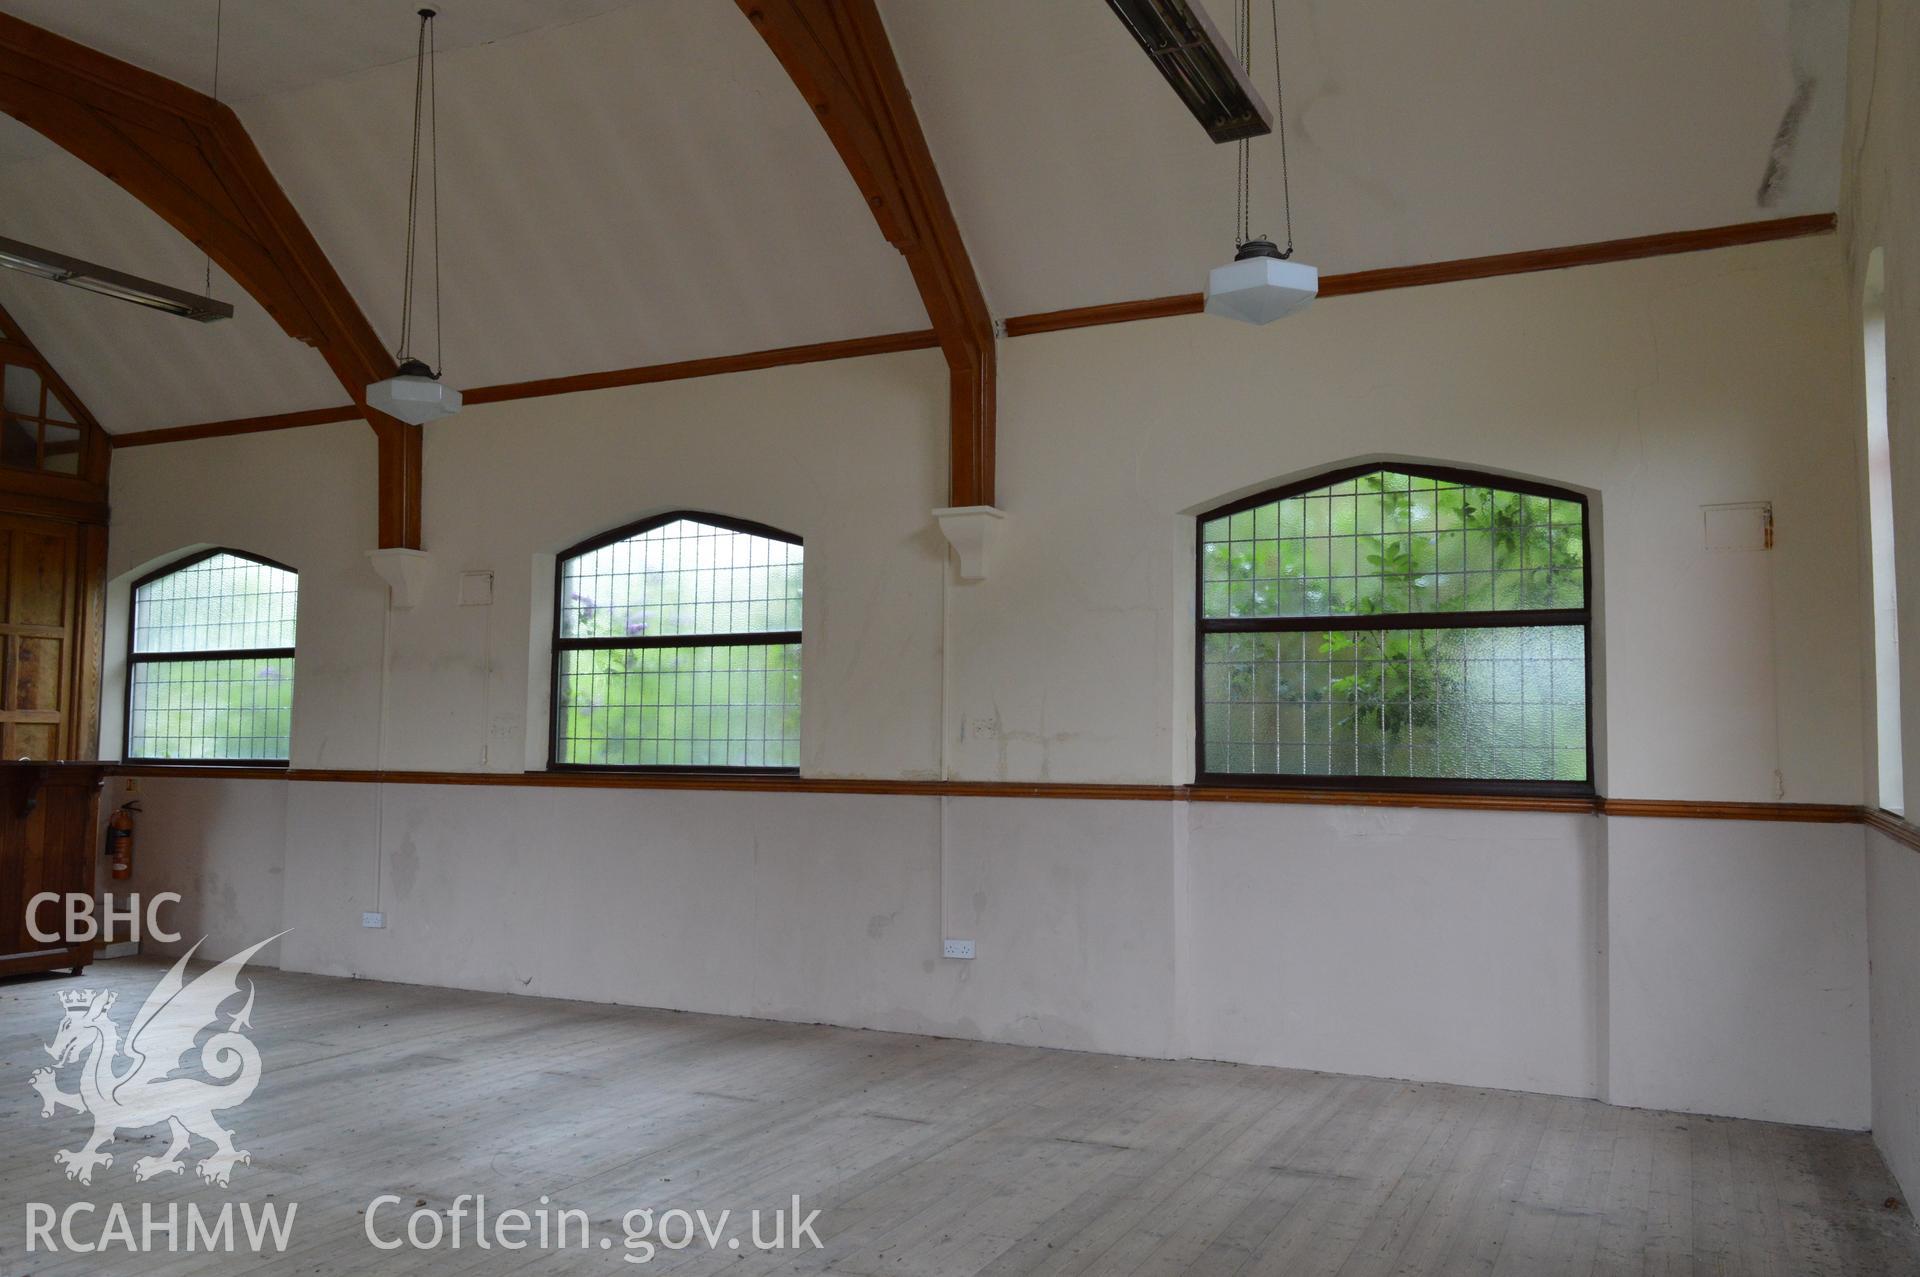 Internal view of south elevation in main church hall. Digital colour photograph taken during CPAT Project 2396 at the United Reformed Church in Northop. Prepared by Clwyd Powys Archaeological Trust, 2018-2019.